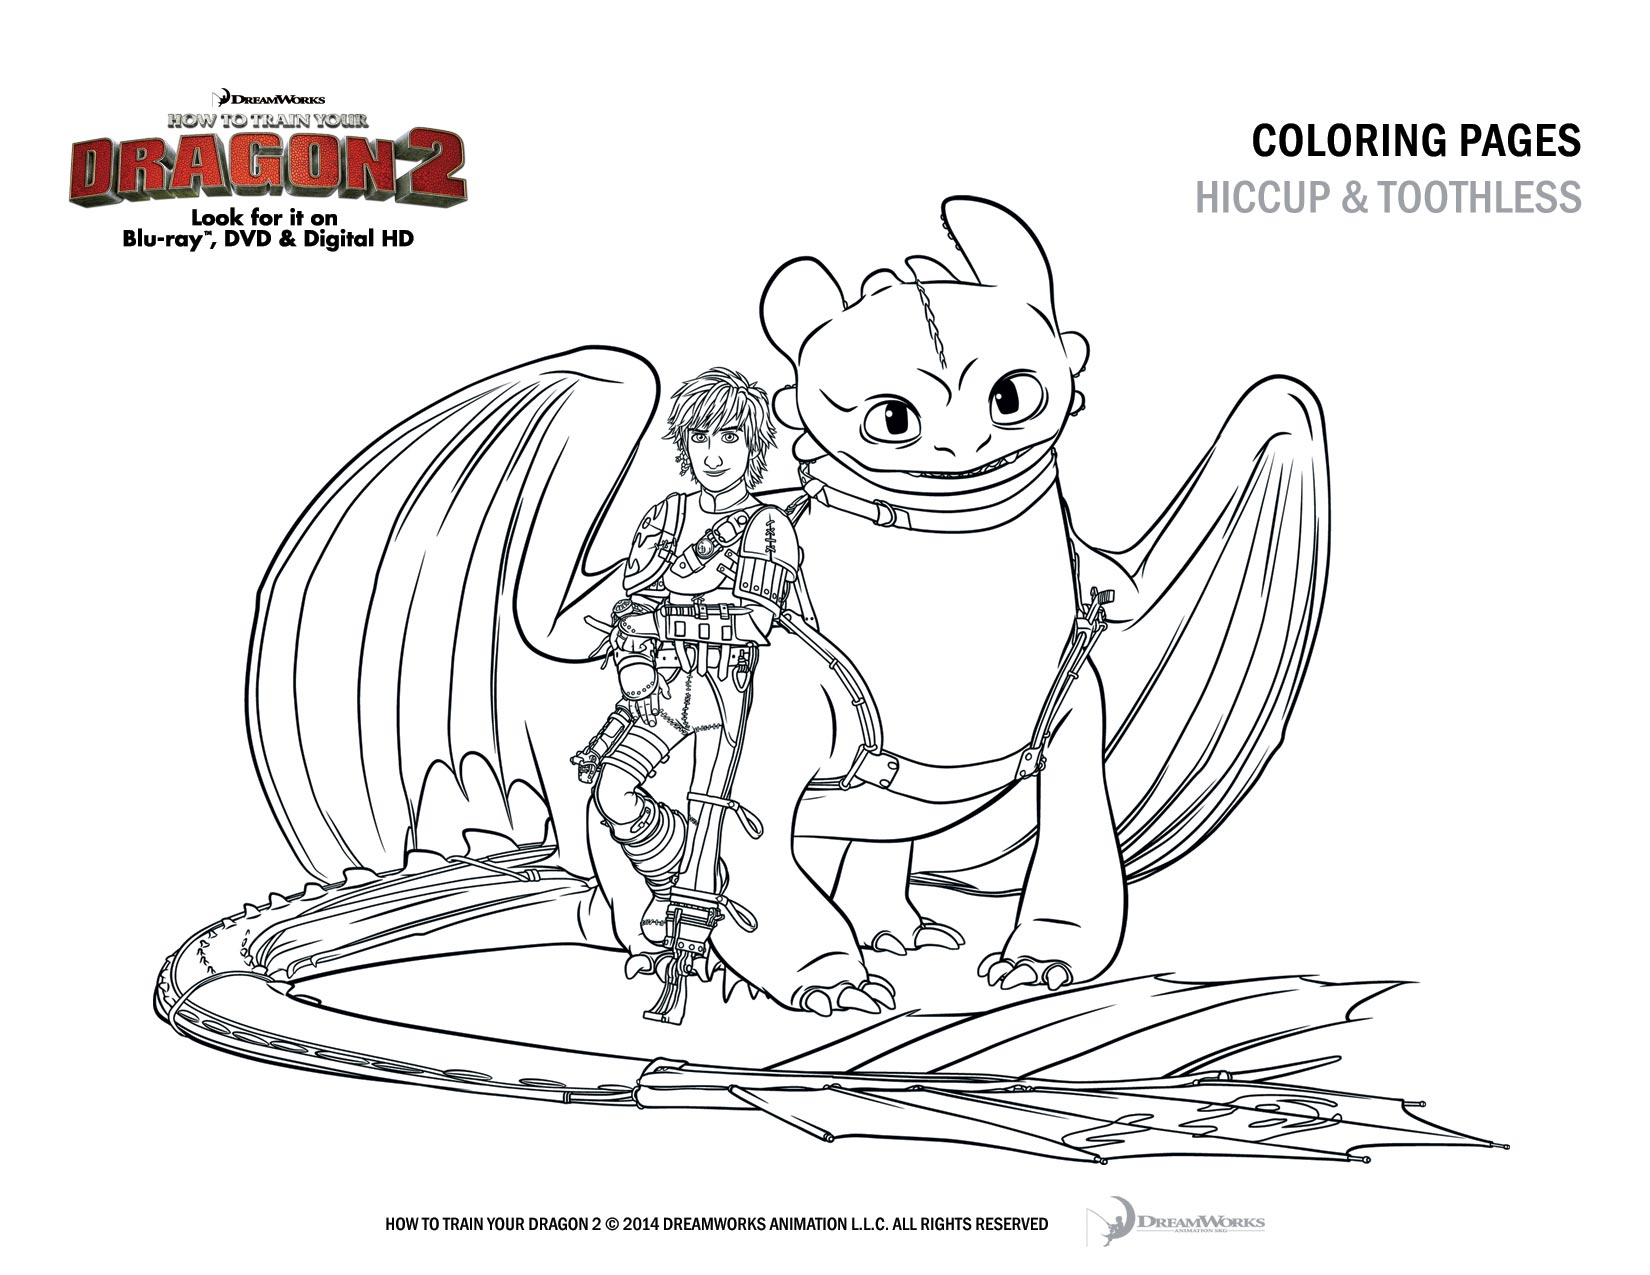 How to Train Your Dragon 2 Free Coloring and Activity Pages #